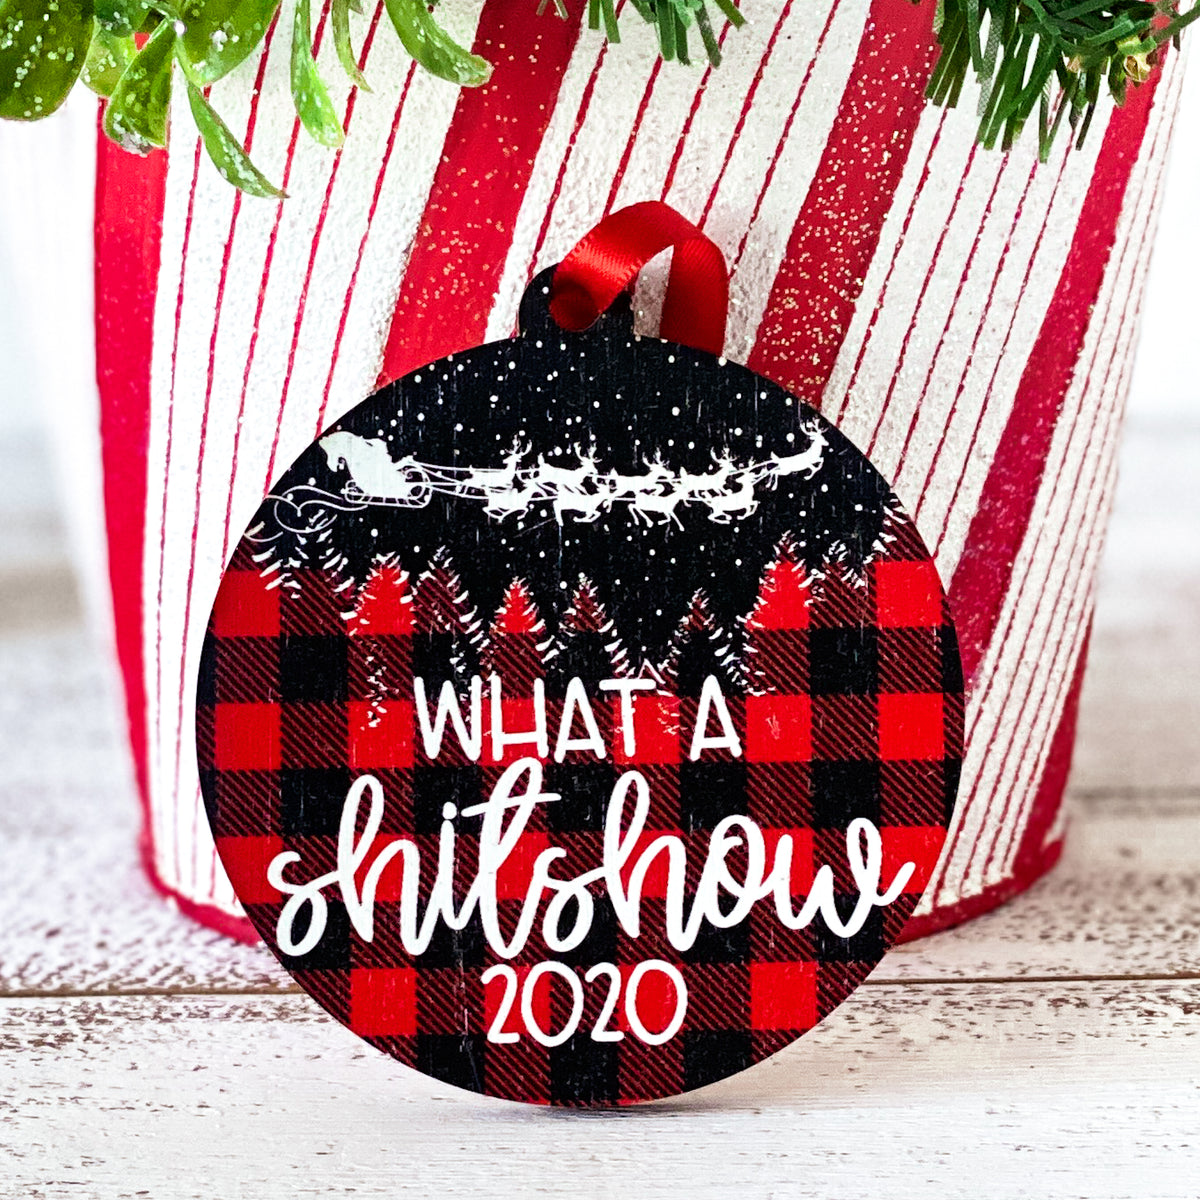 What a shitshow on round ornament. Red and black buffalo plaid background with Santa&#39;s sleigh